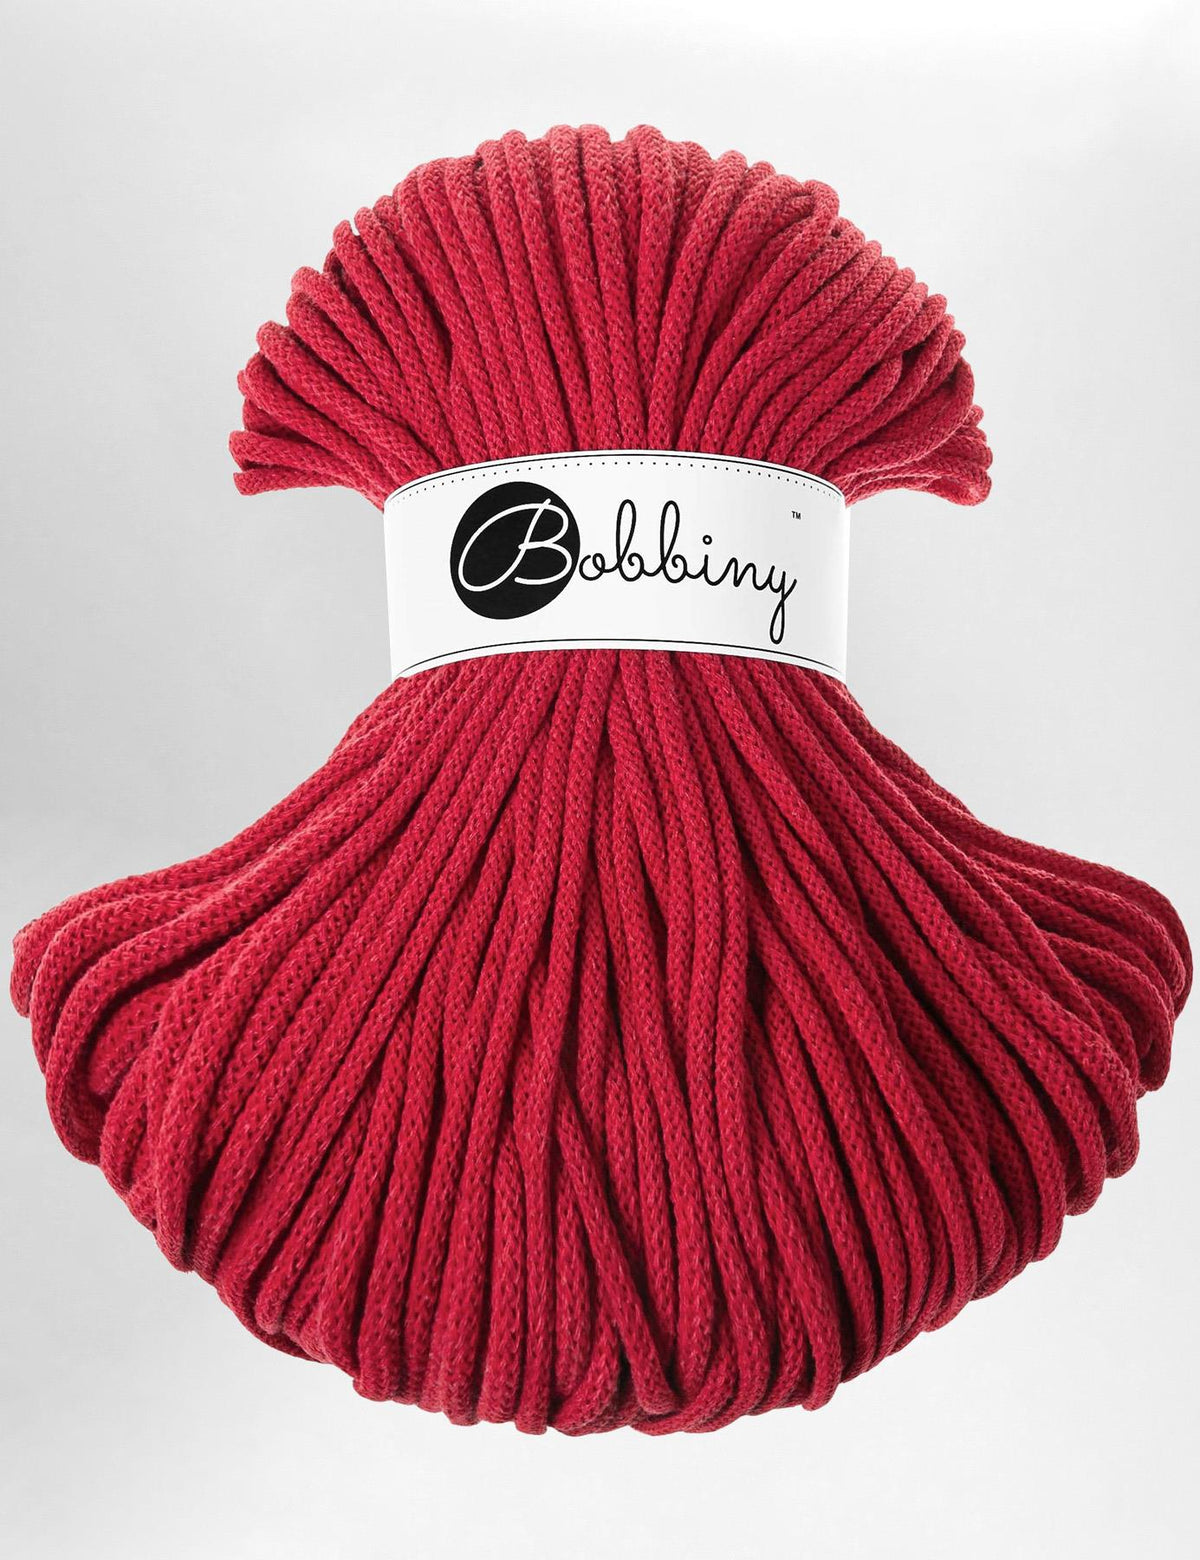 5mm Classic Red recycled cotton macrame cord by Bobbiny (100m)